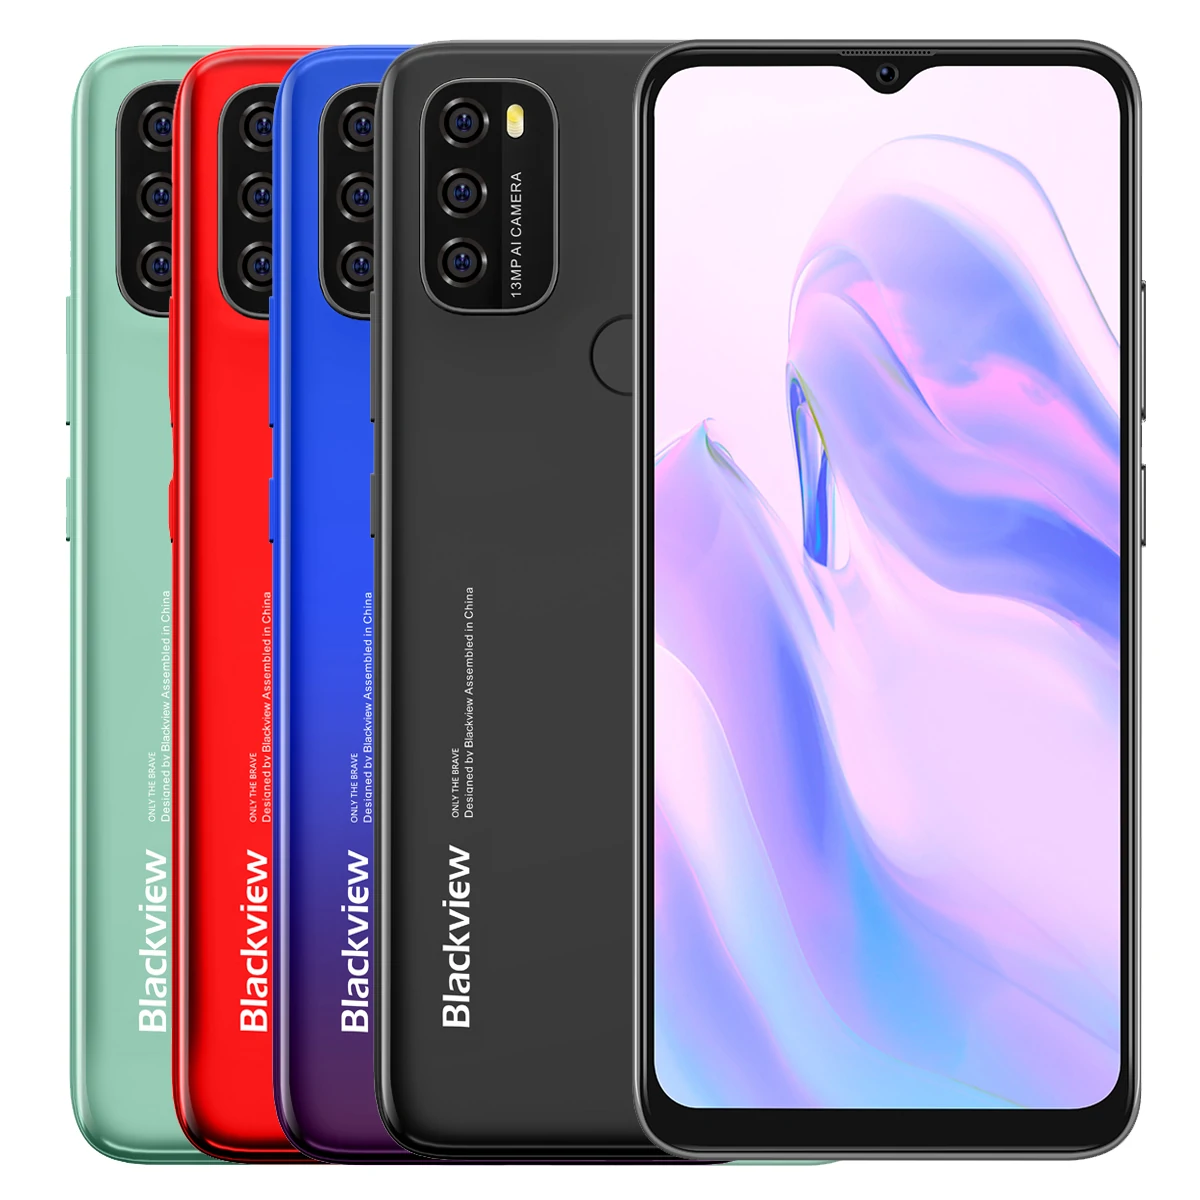 Find Blackview A70 Pro Global Version 6 517 inch 5380mAh Android 11 0 4GB 32GB T310 4G Smartphone for Sale on Gipsybee.com